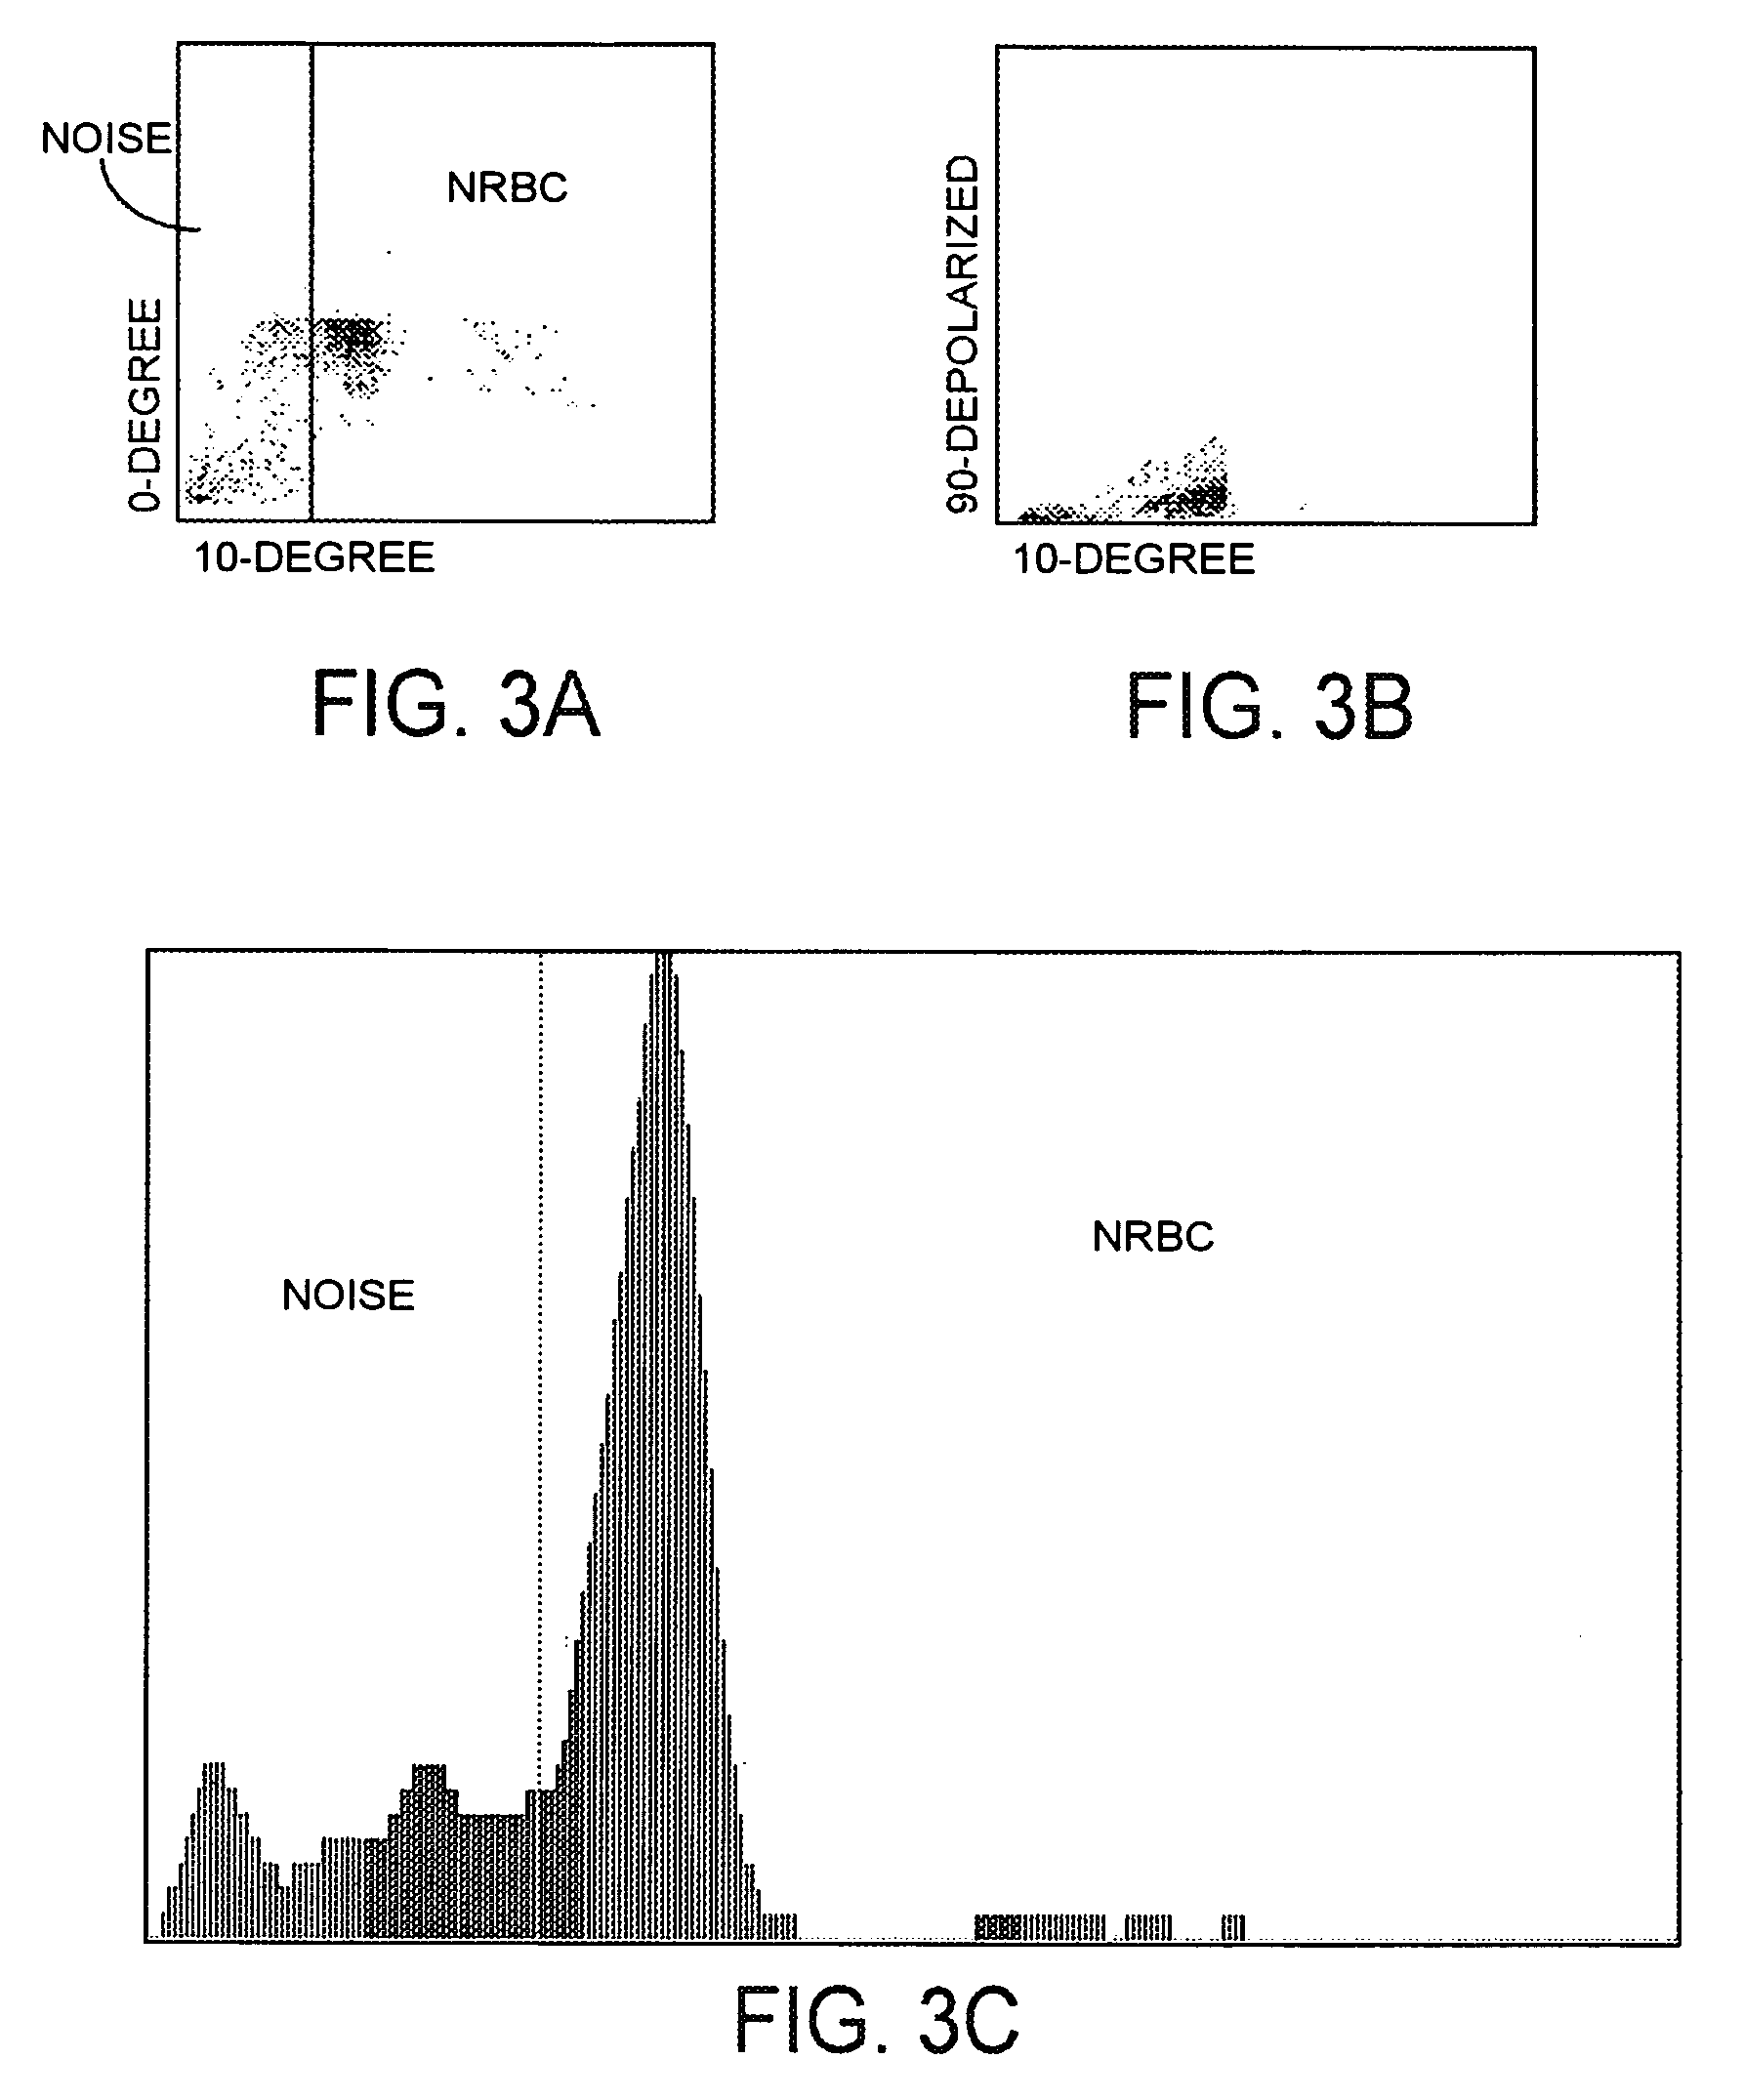 Method for determination of nucleated red blood cells and leukocytes in a whole blood sample in an automated hematology analyzer